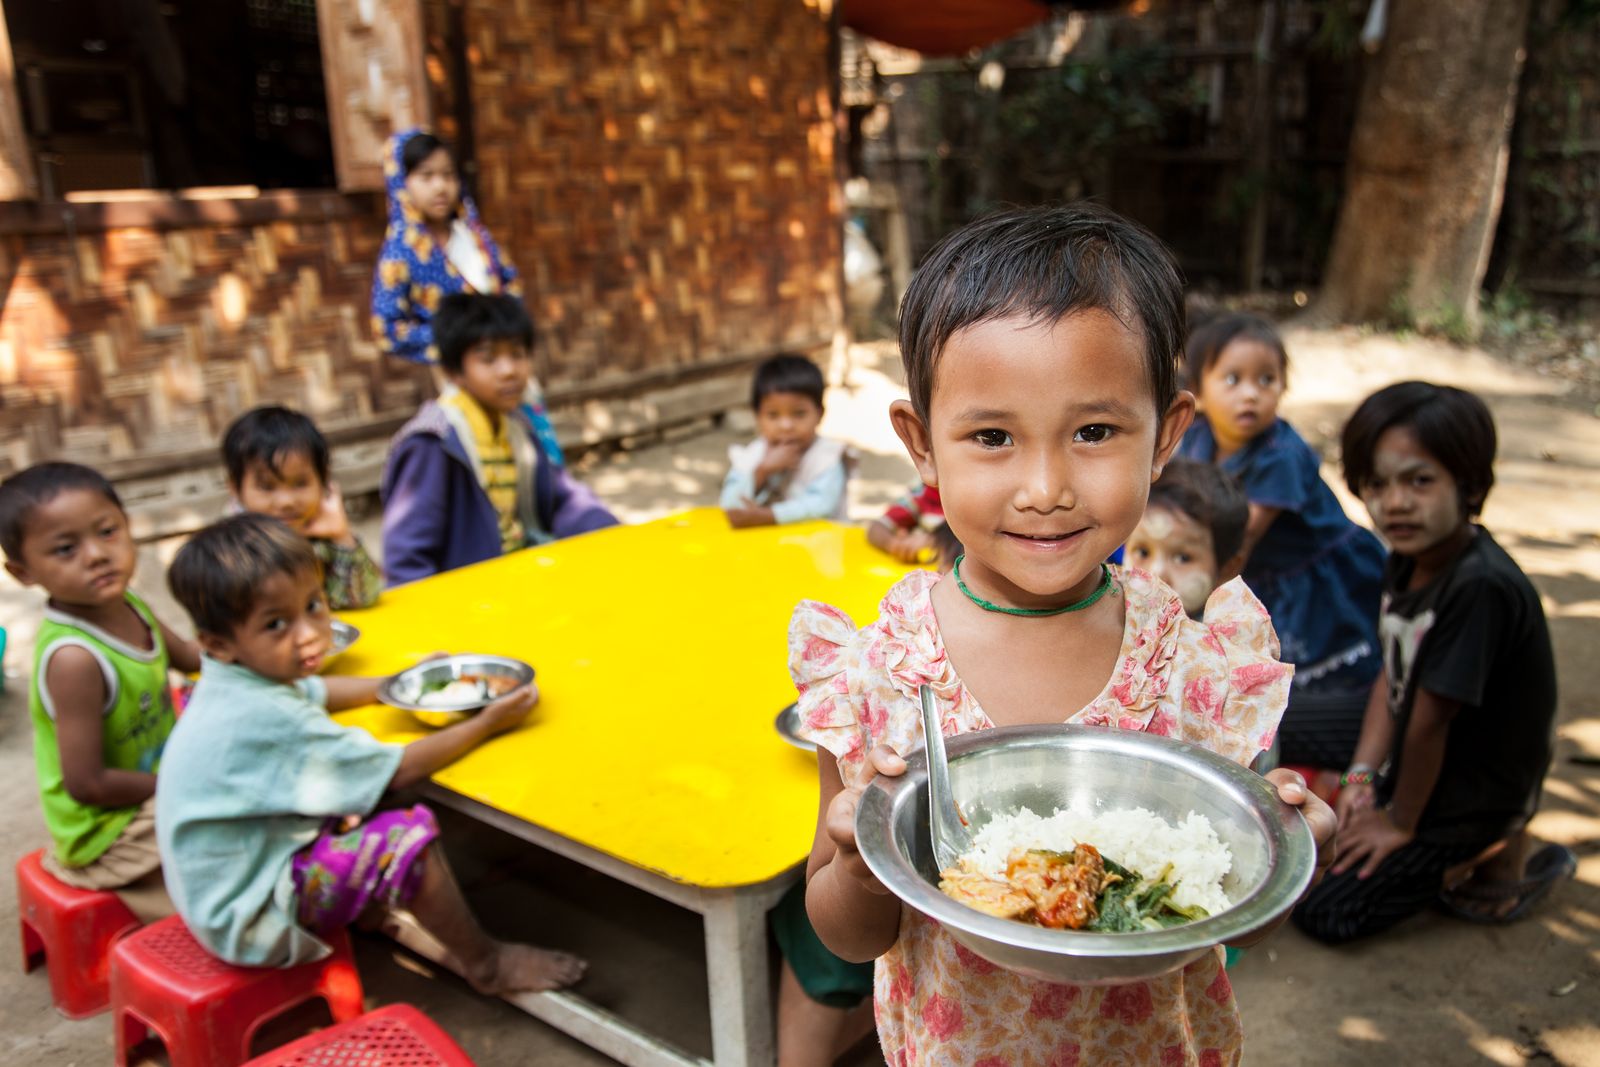 Young girls smiles at camera whilst holding a plate of food